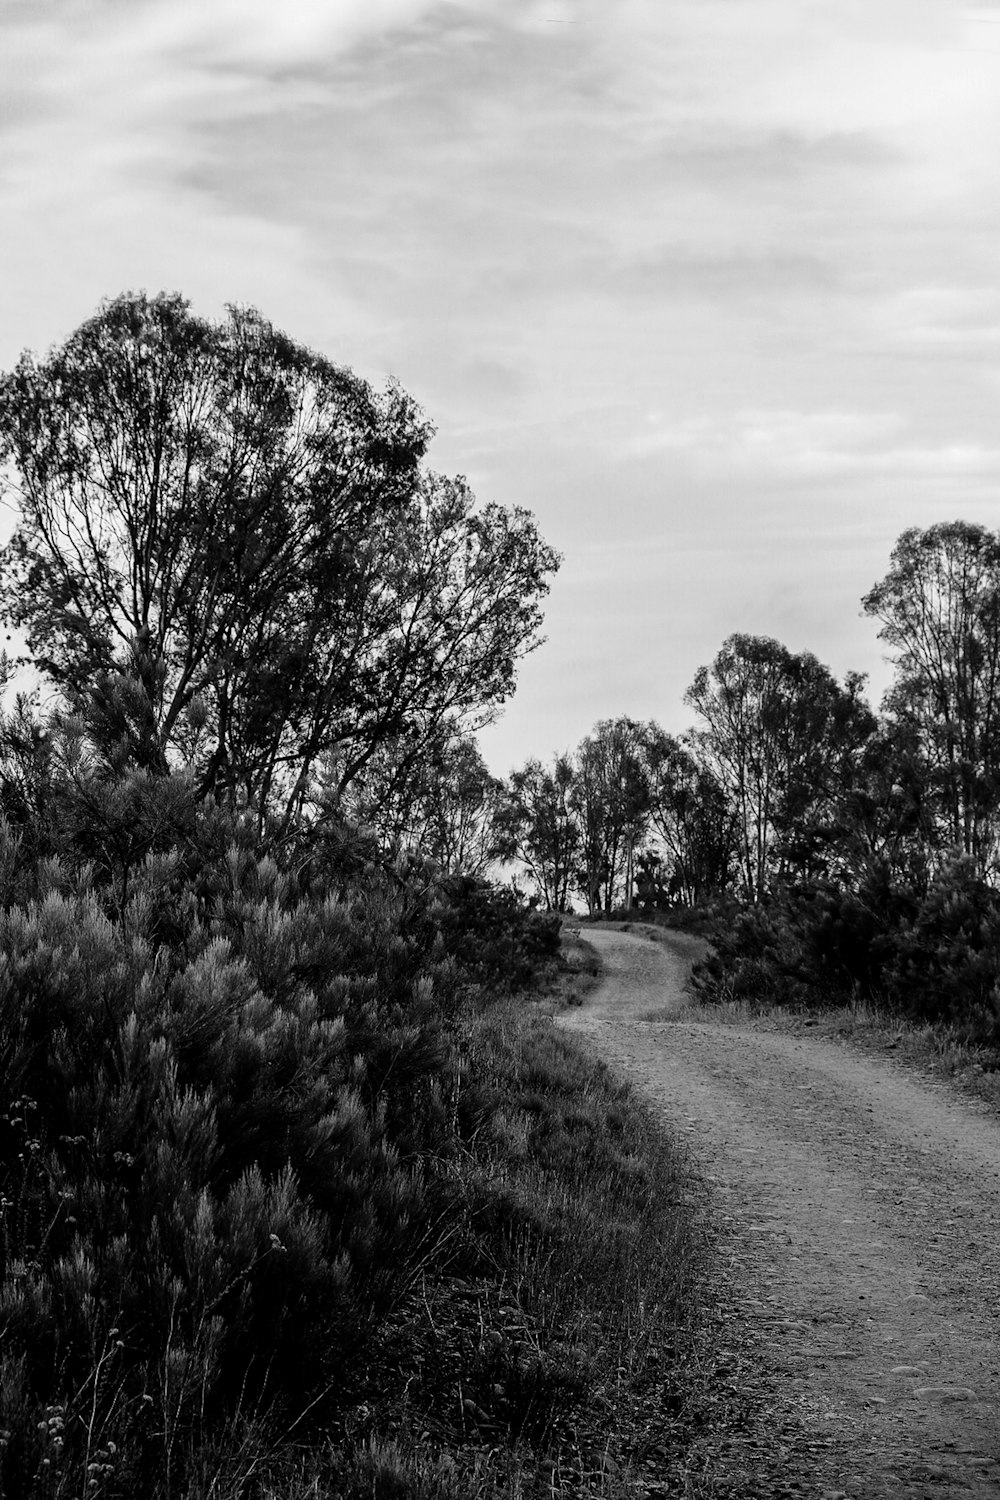 a black and white photo of a dirt road